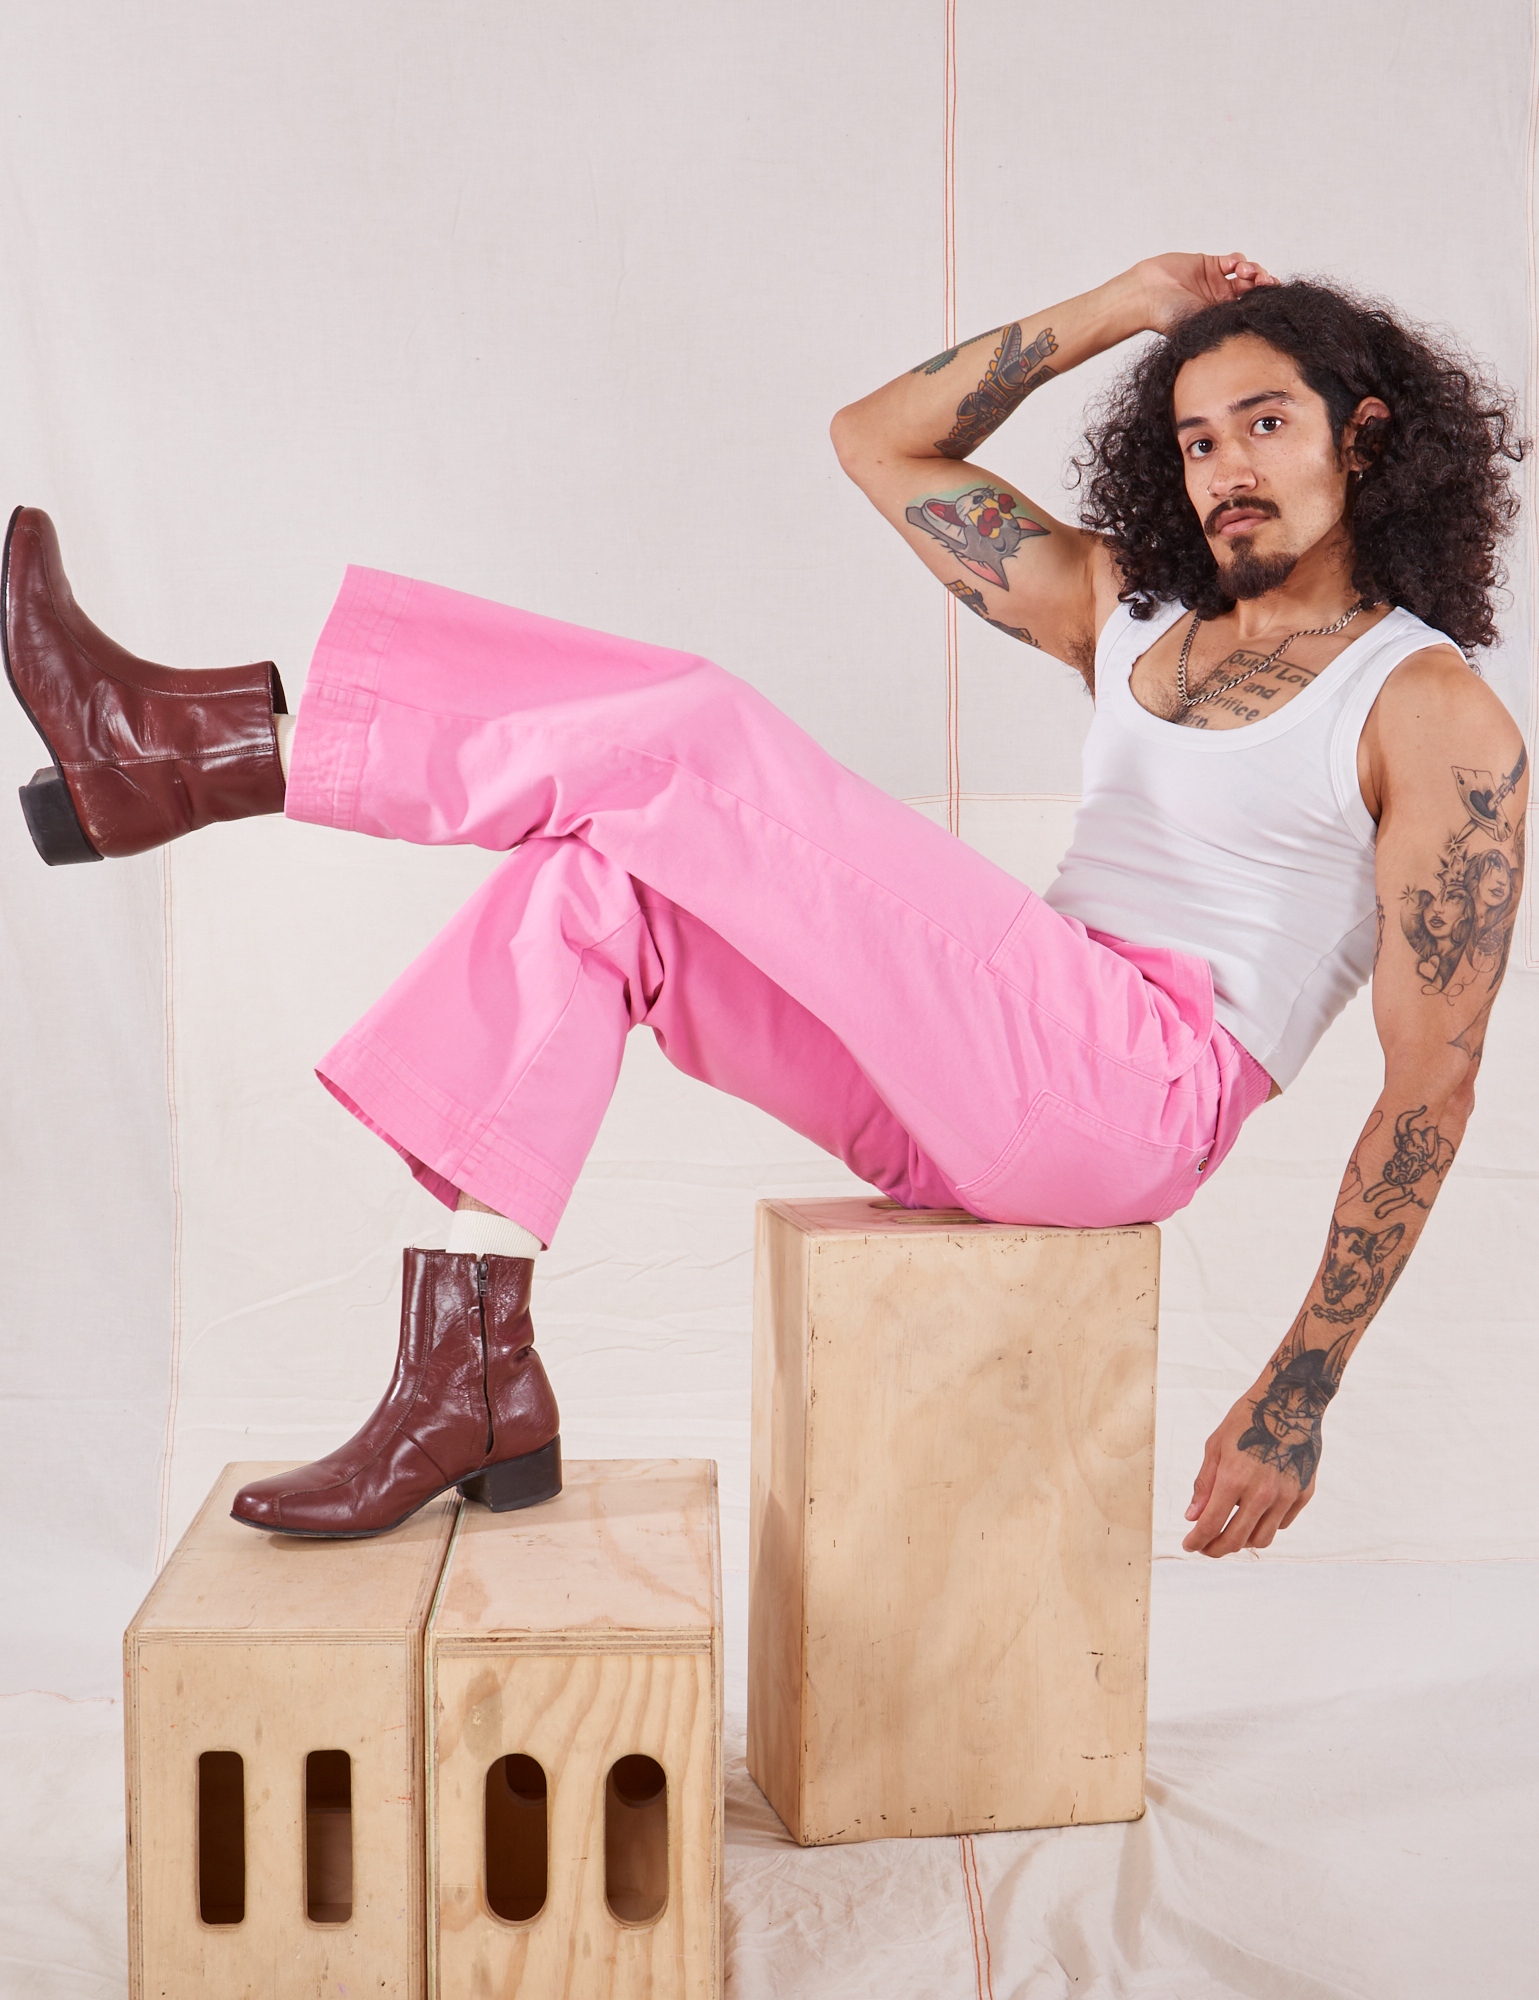 Jesse is wearing Action Pants in Bubblegum Pink and Cropped Tank in vintage tee off-white